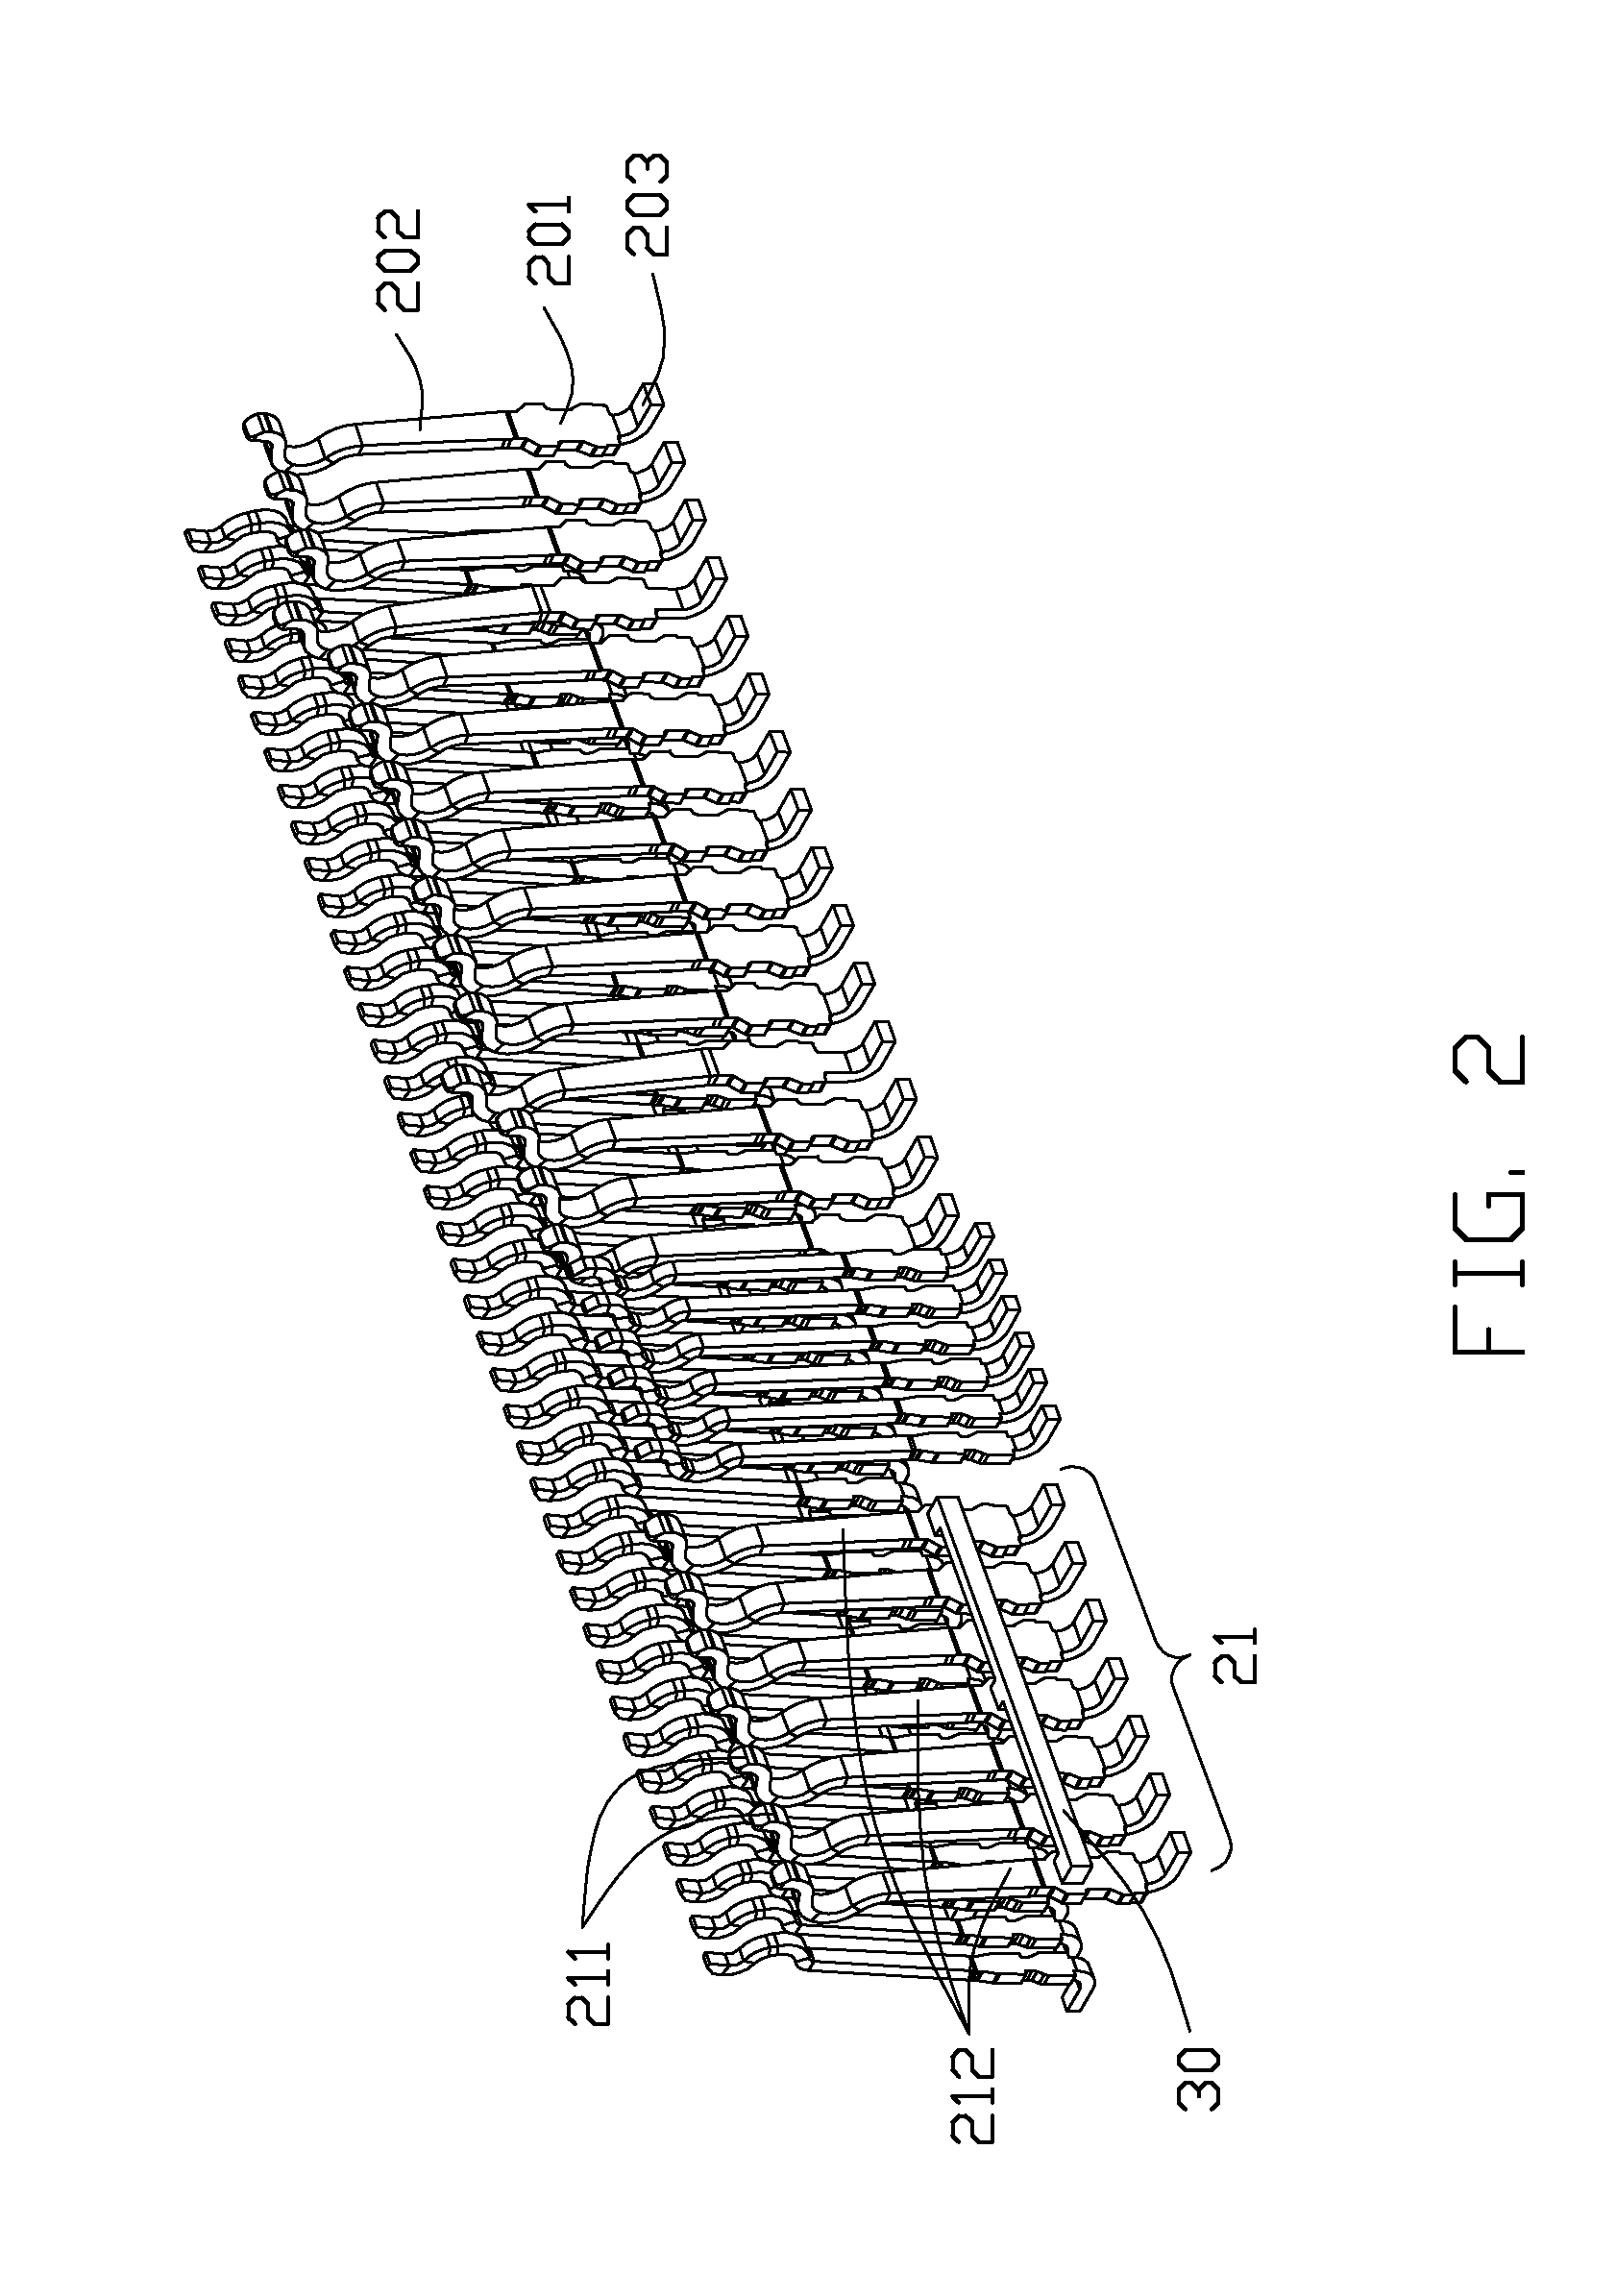 Electrical connector having better high-frequency performance